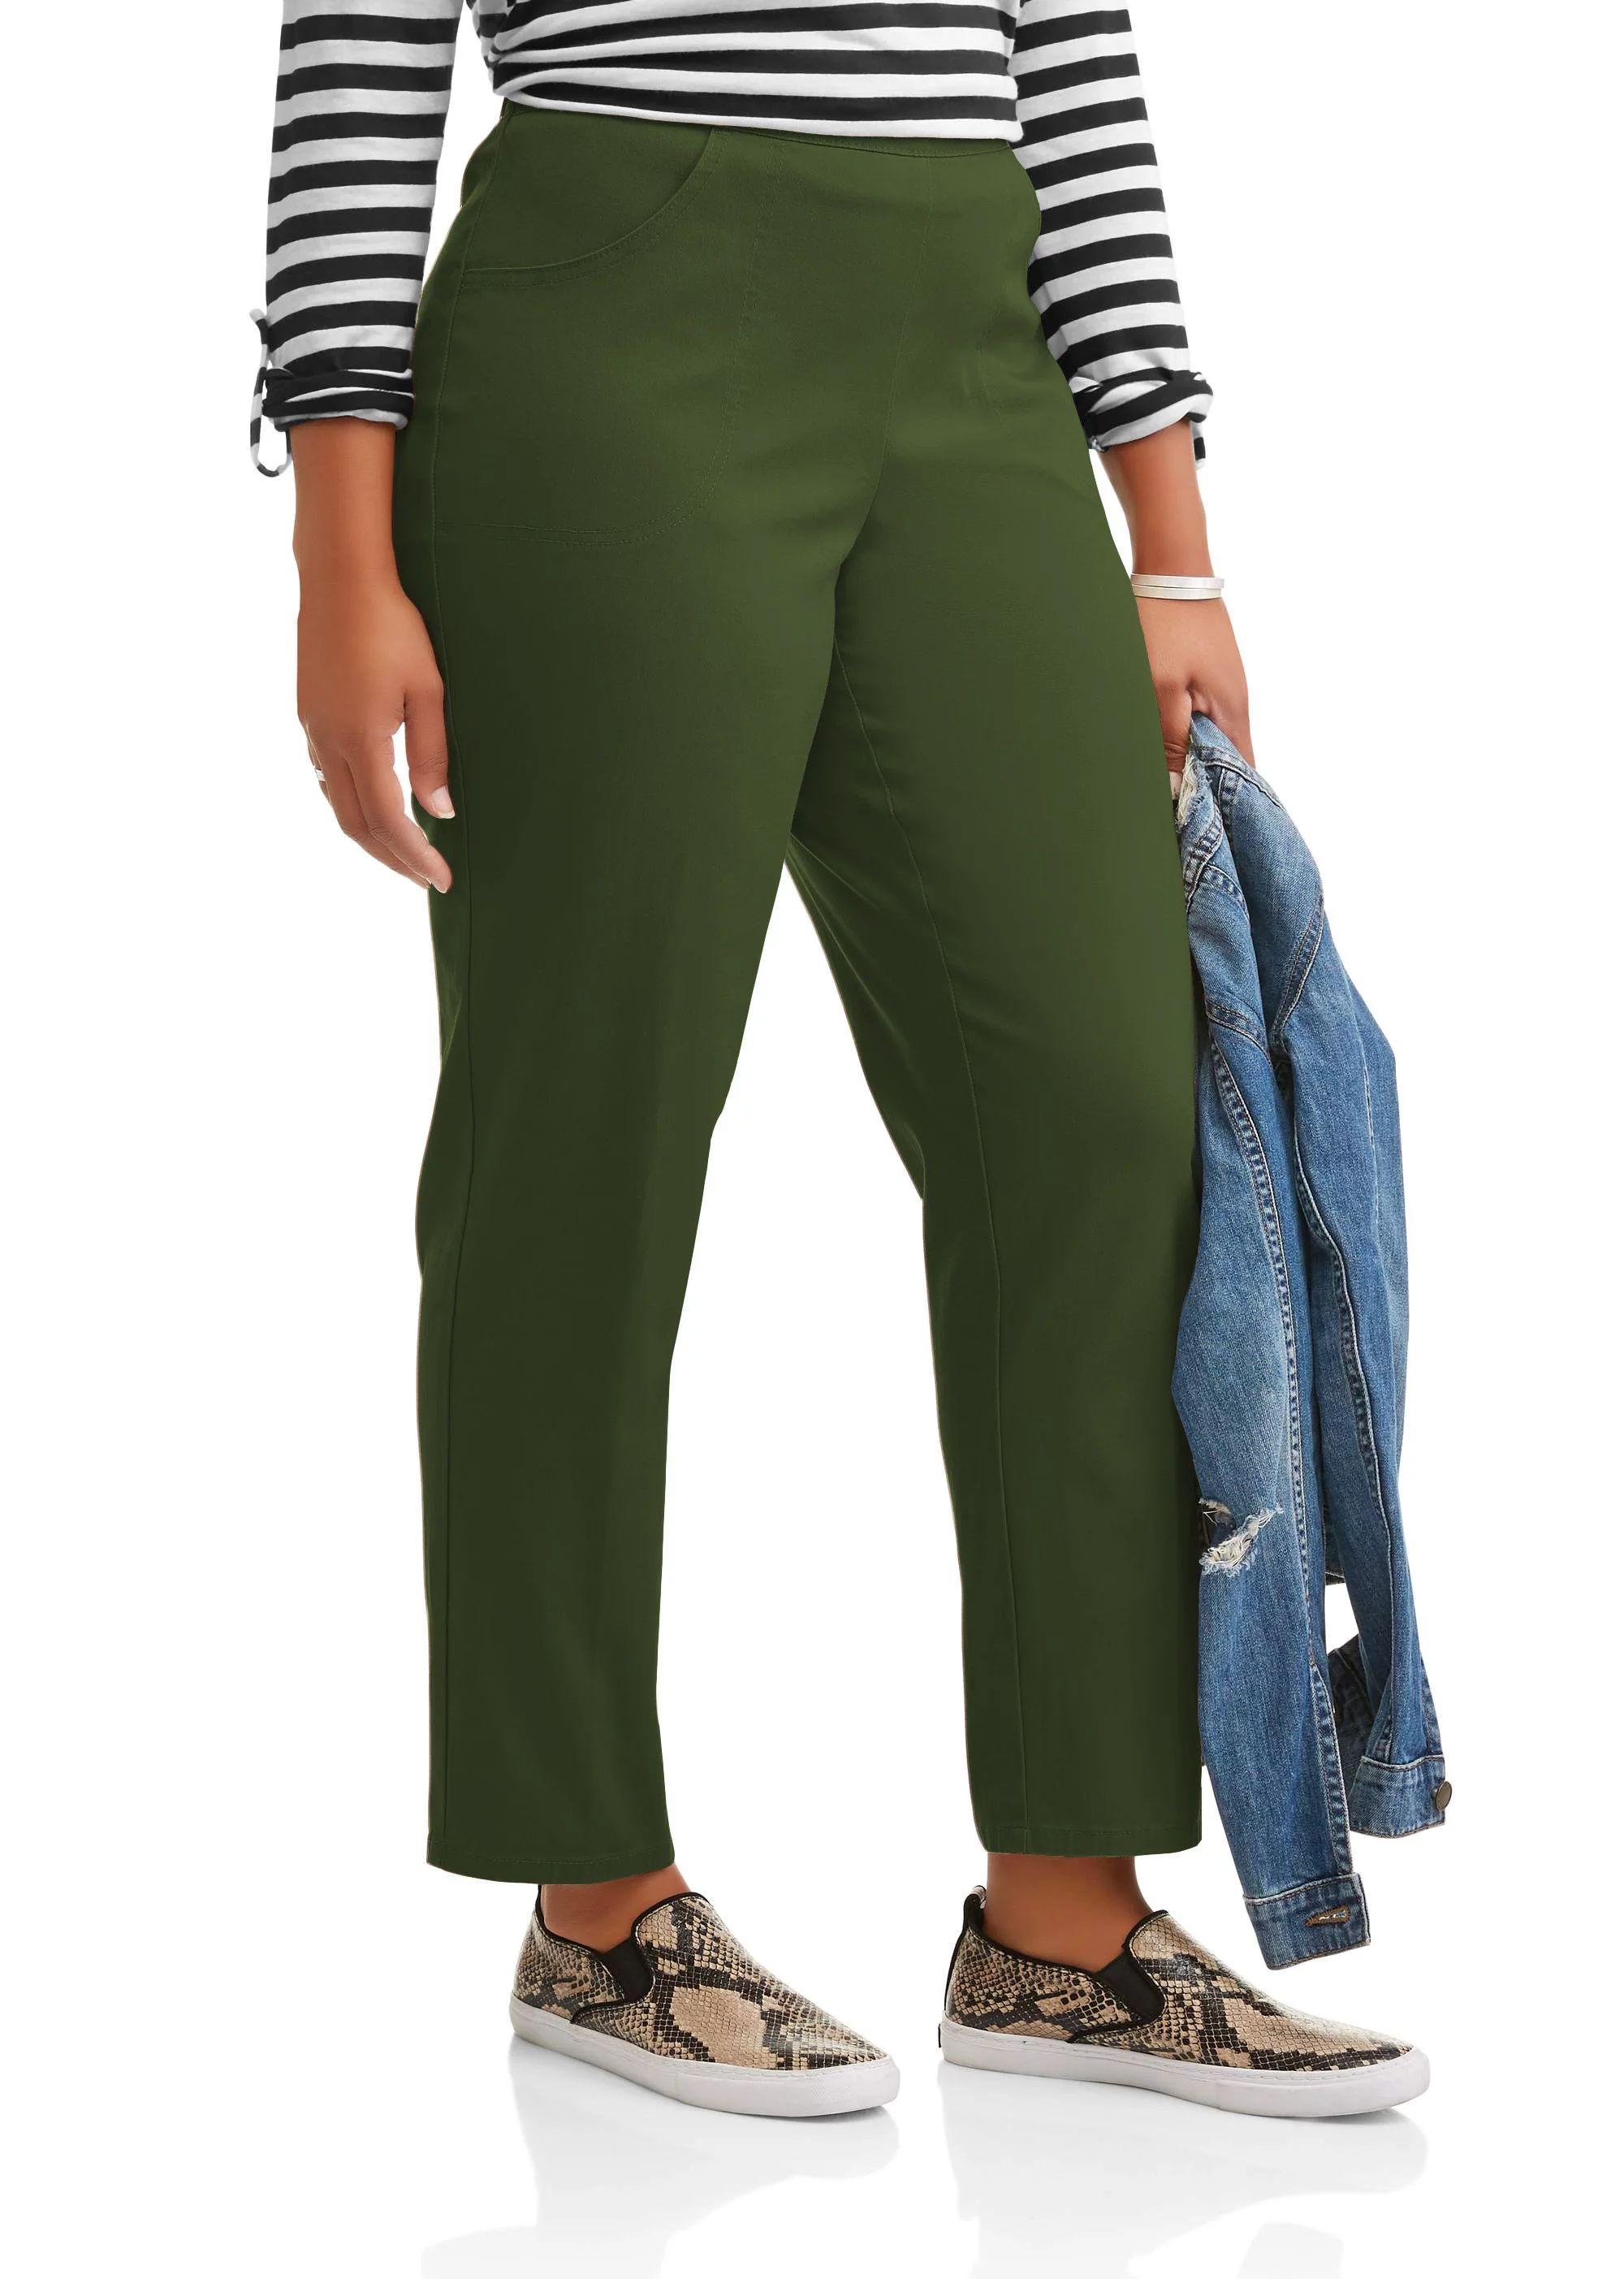 Just My Size Women’s Plus Size Pull-On Stretch Woven Pants, Also in Petite | Walmart (US)